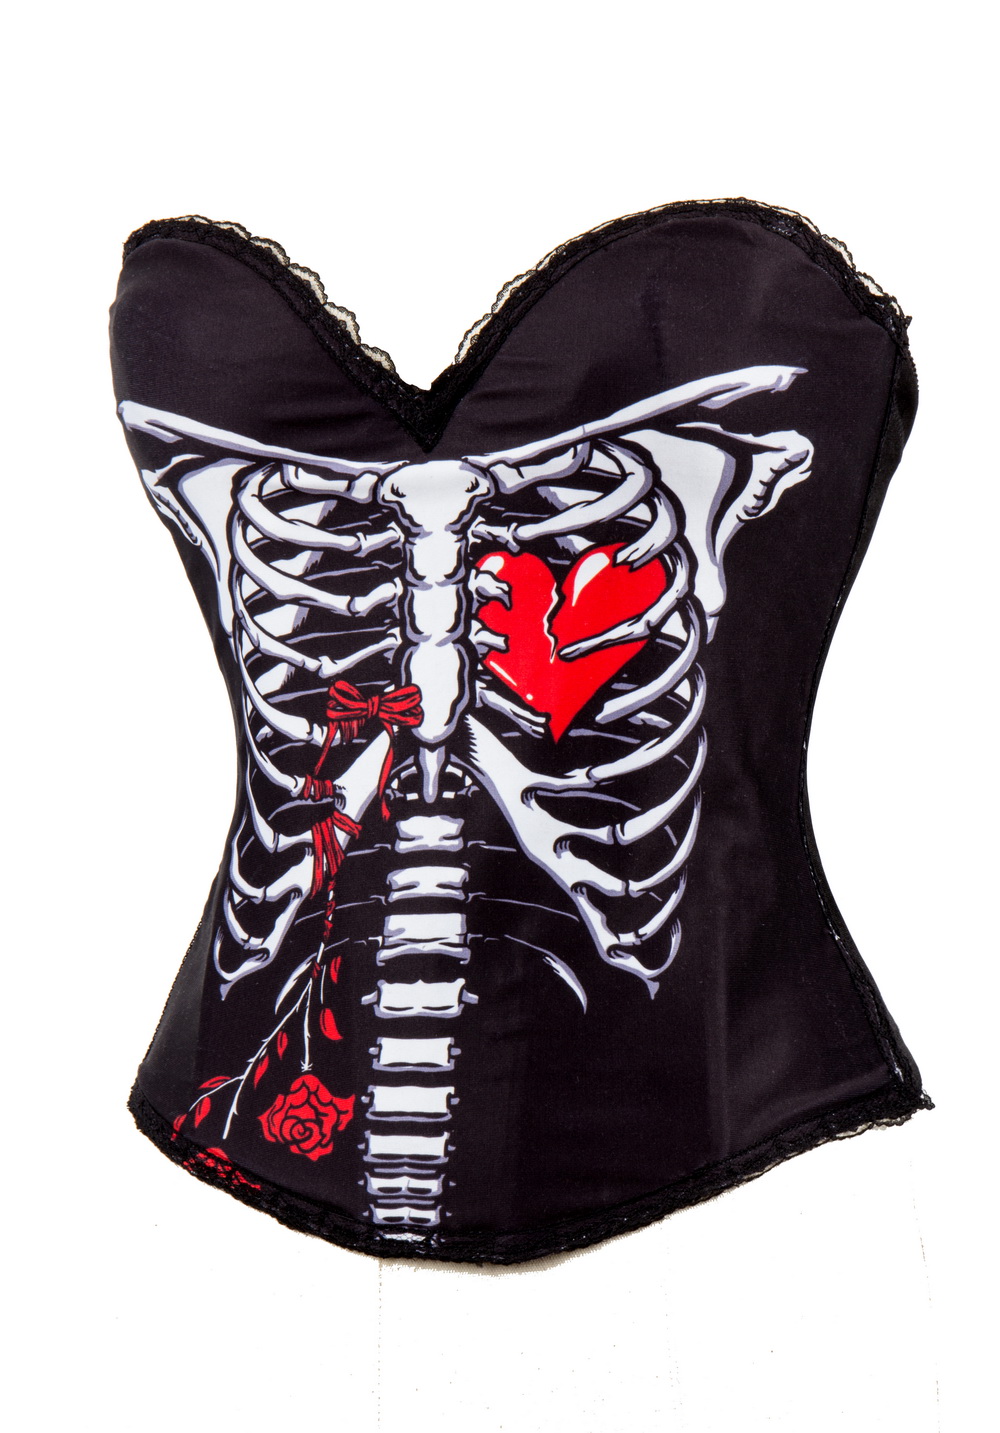 F66364  Skeleton with Heart & Floral Print Black Cotton Push Up Bustier Corset